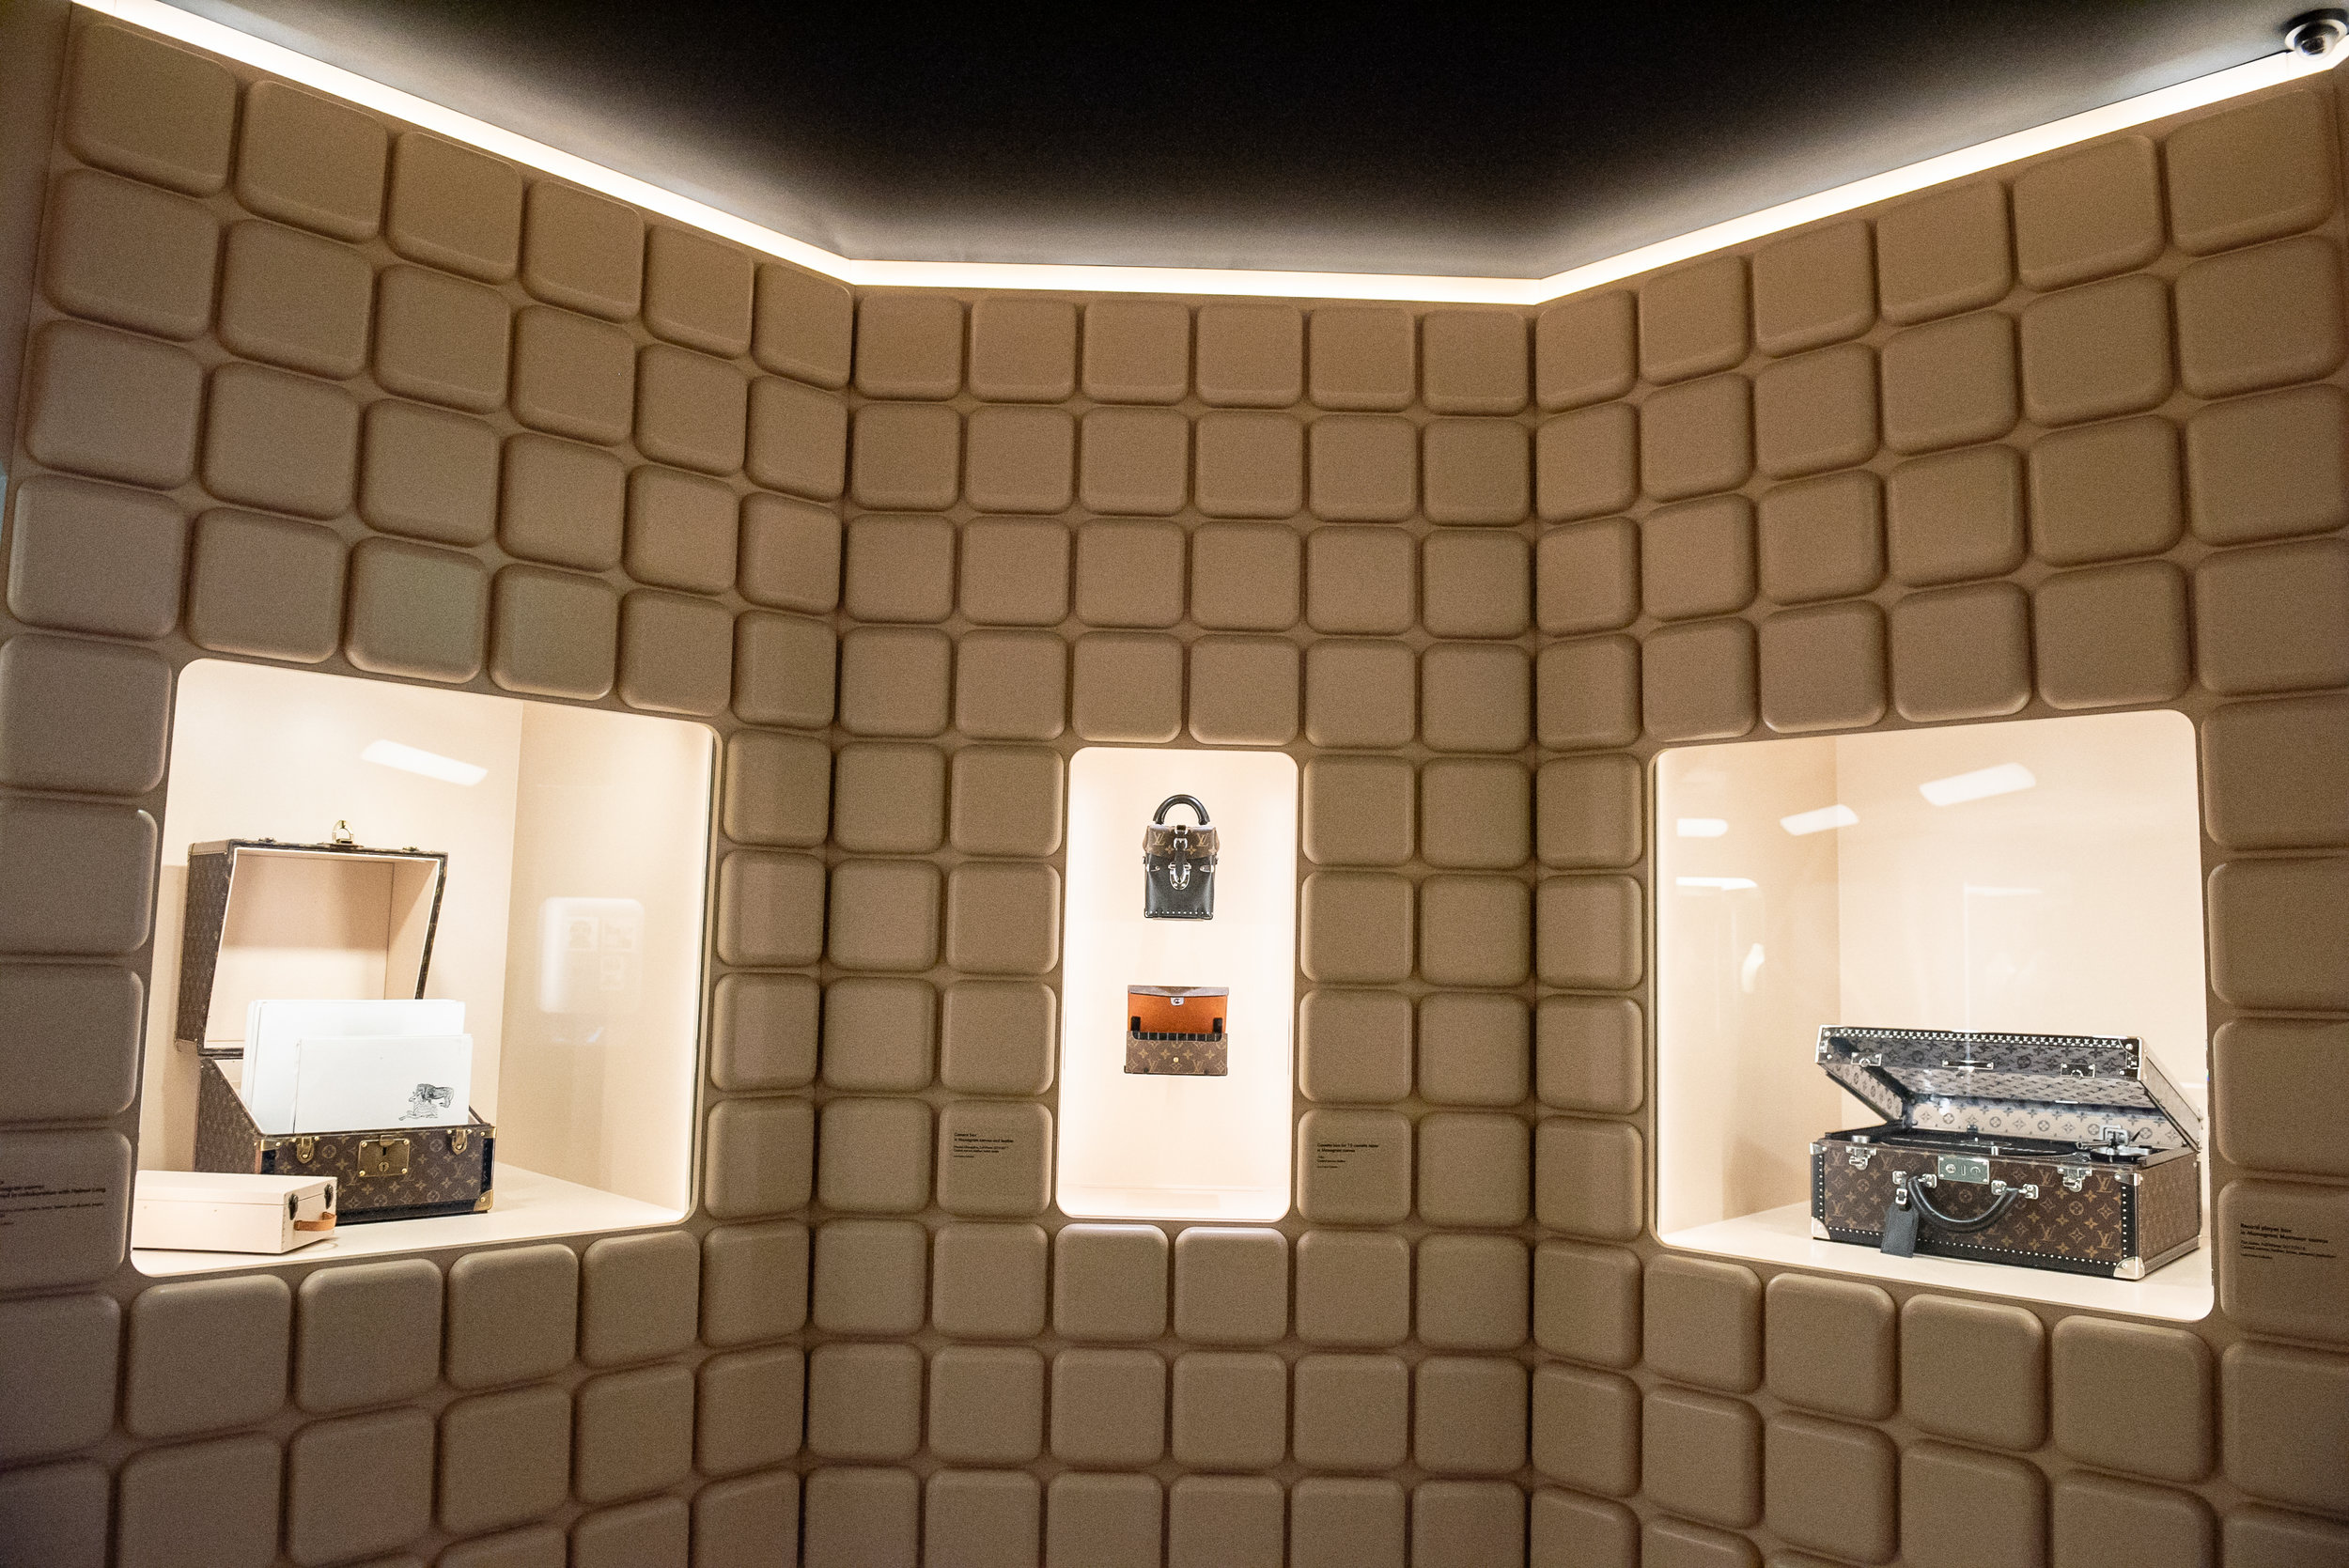 Transcend time and space with Louis Vuitton's 'Time Capsule